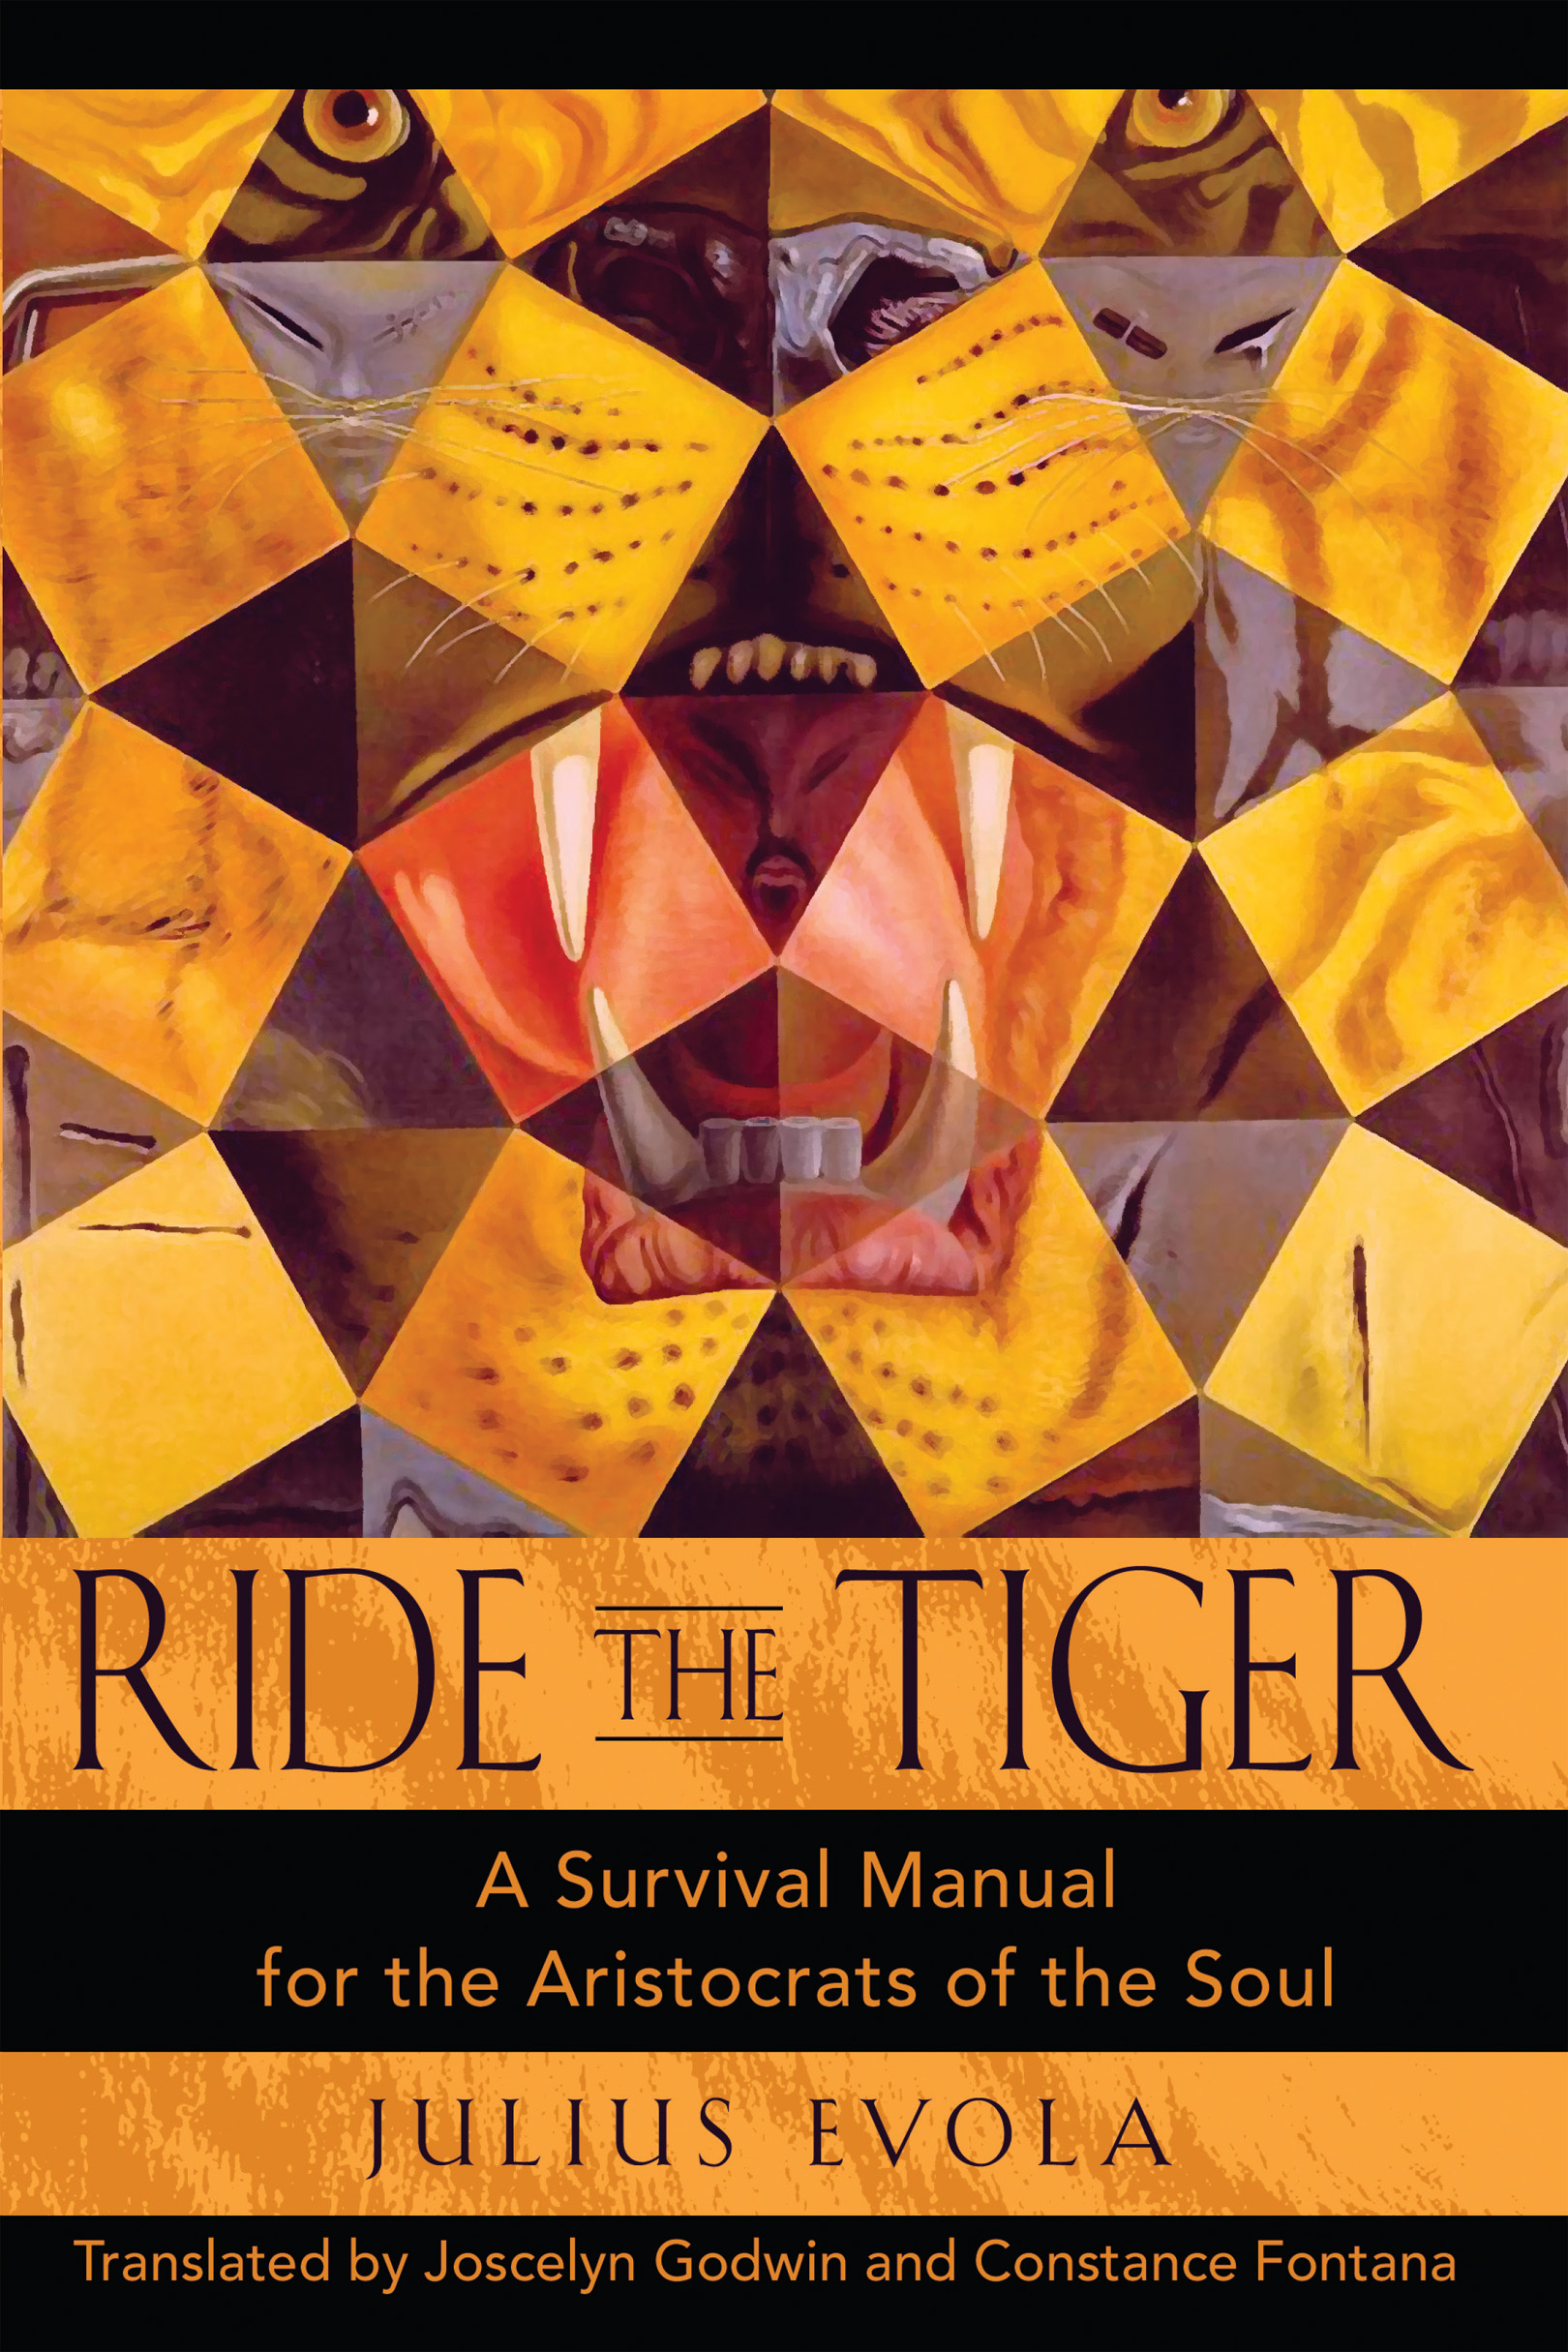 Ride the tiger a survival manual for the aristocrats of the soul - image 1